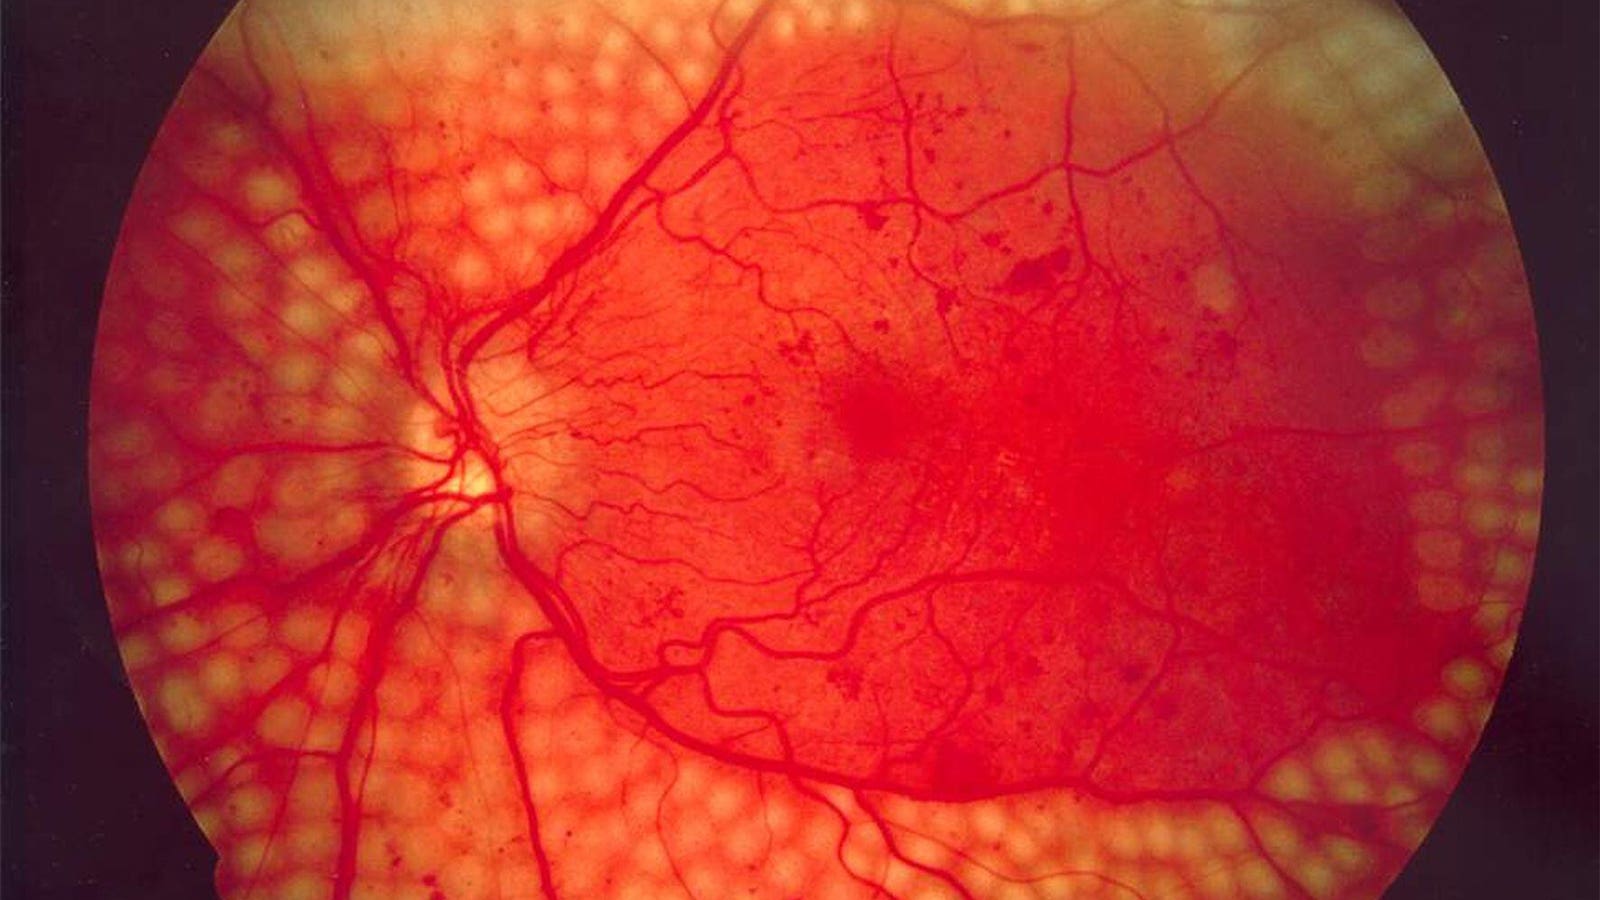 Combo Anesthesia During Retinal Laser Treatment Reduced Pain Perception